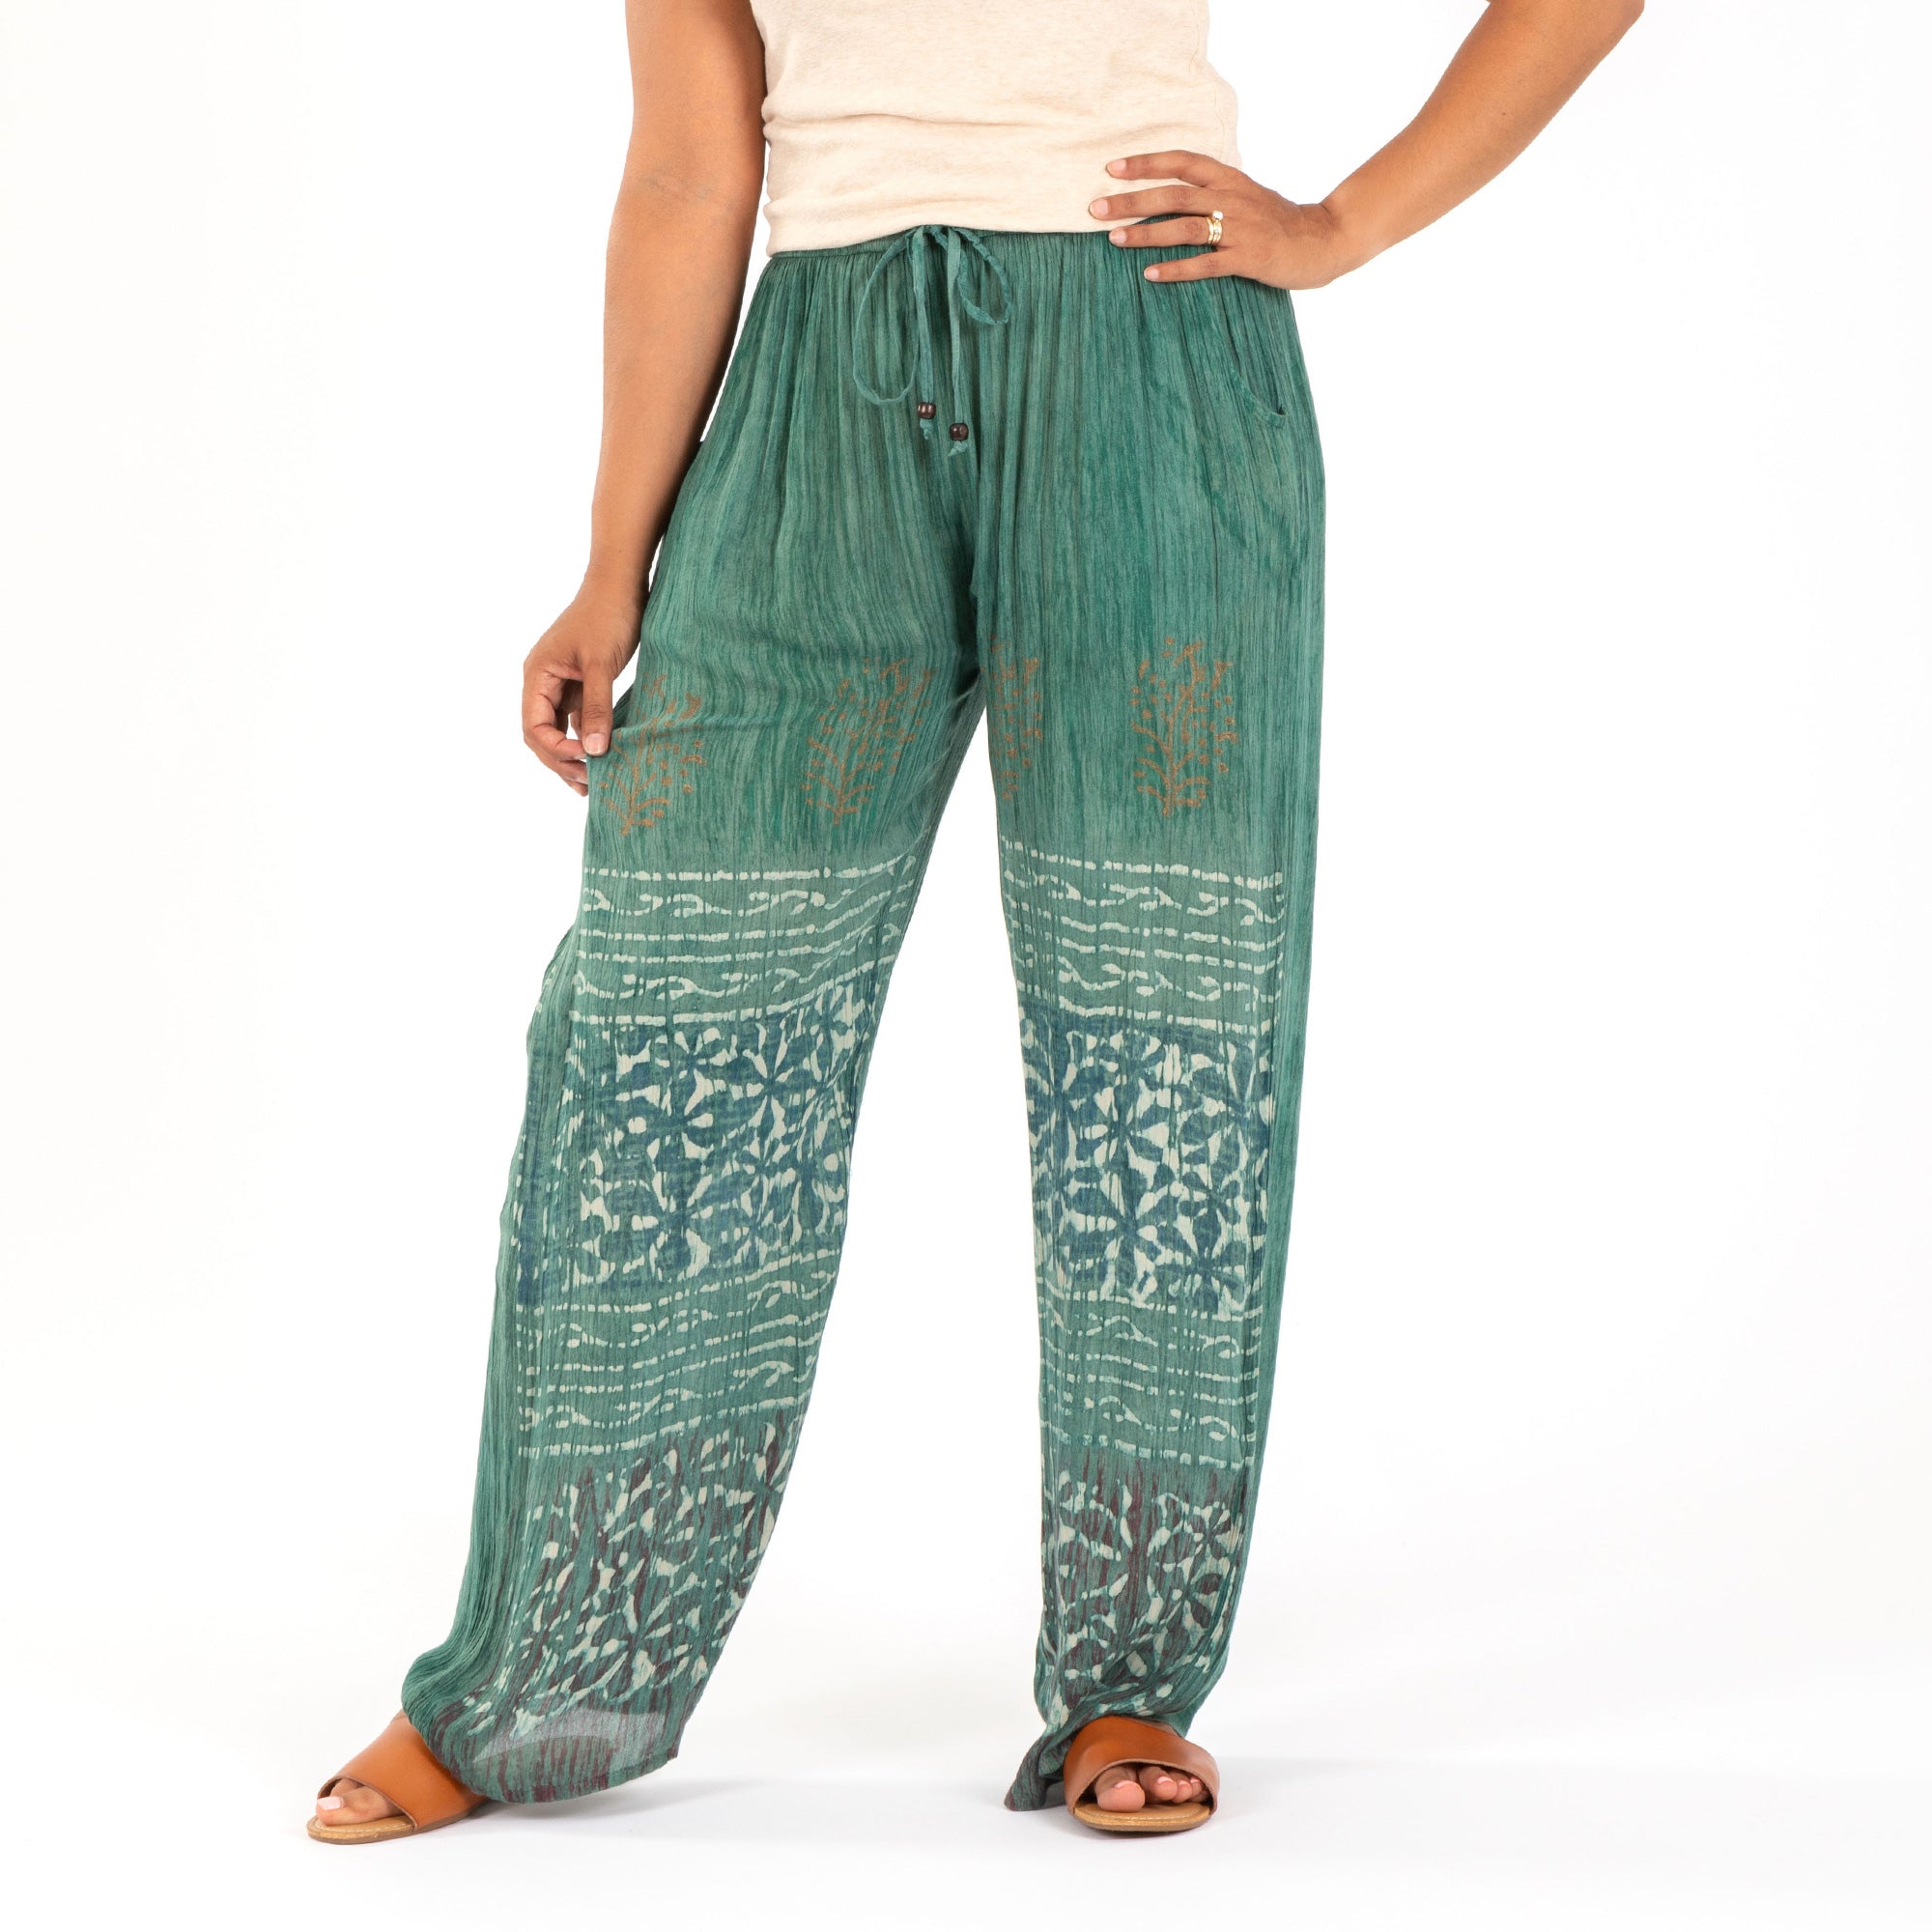 Women's Made To Move Casual Palazzo Pants & Top Set - Pants - Forest Green - 2X